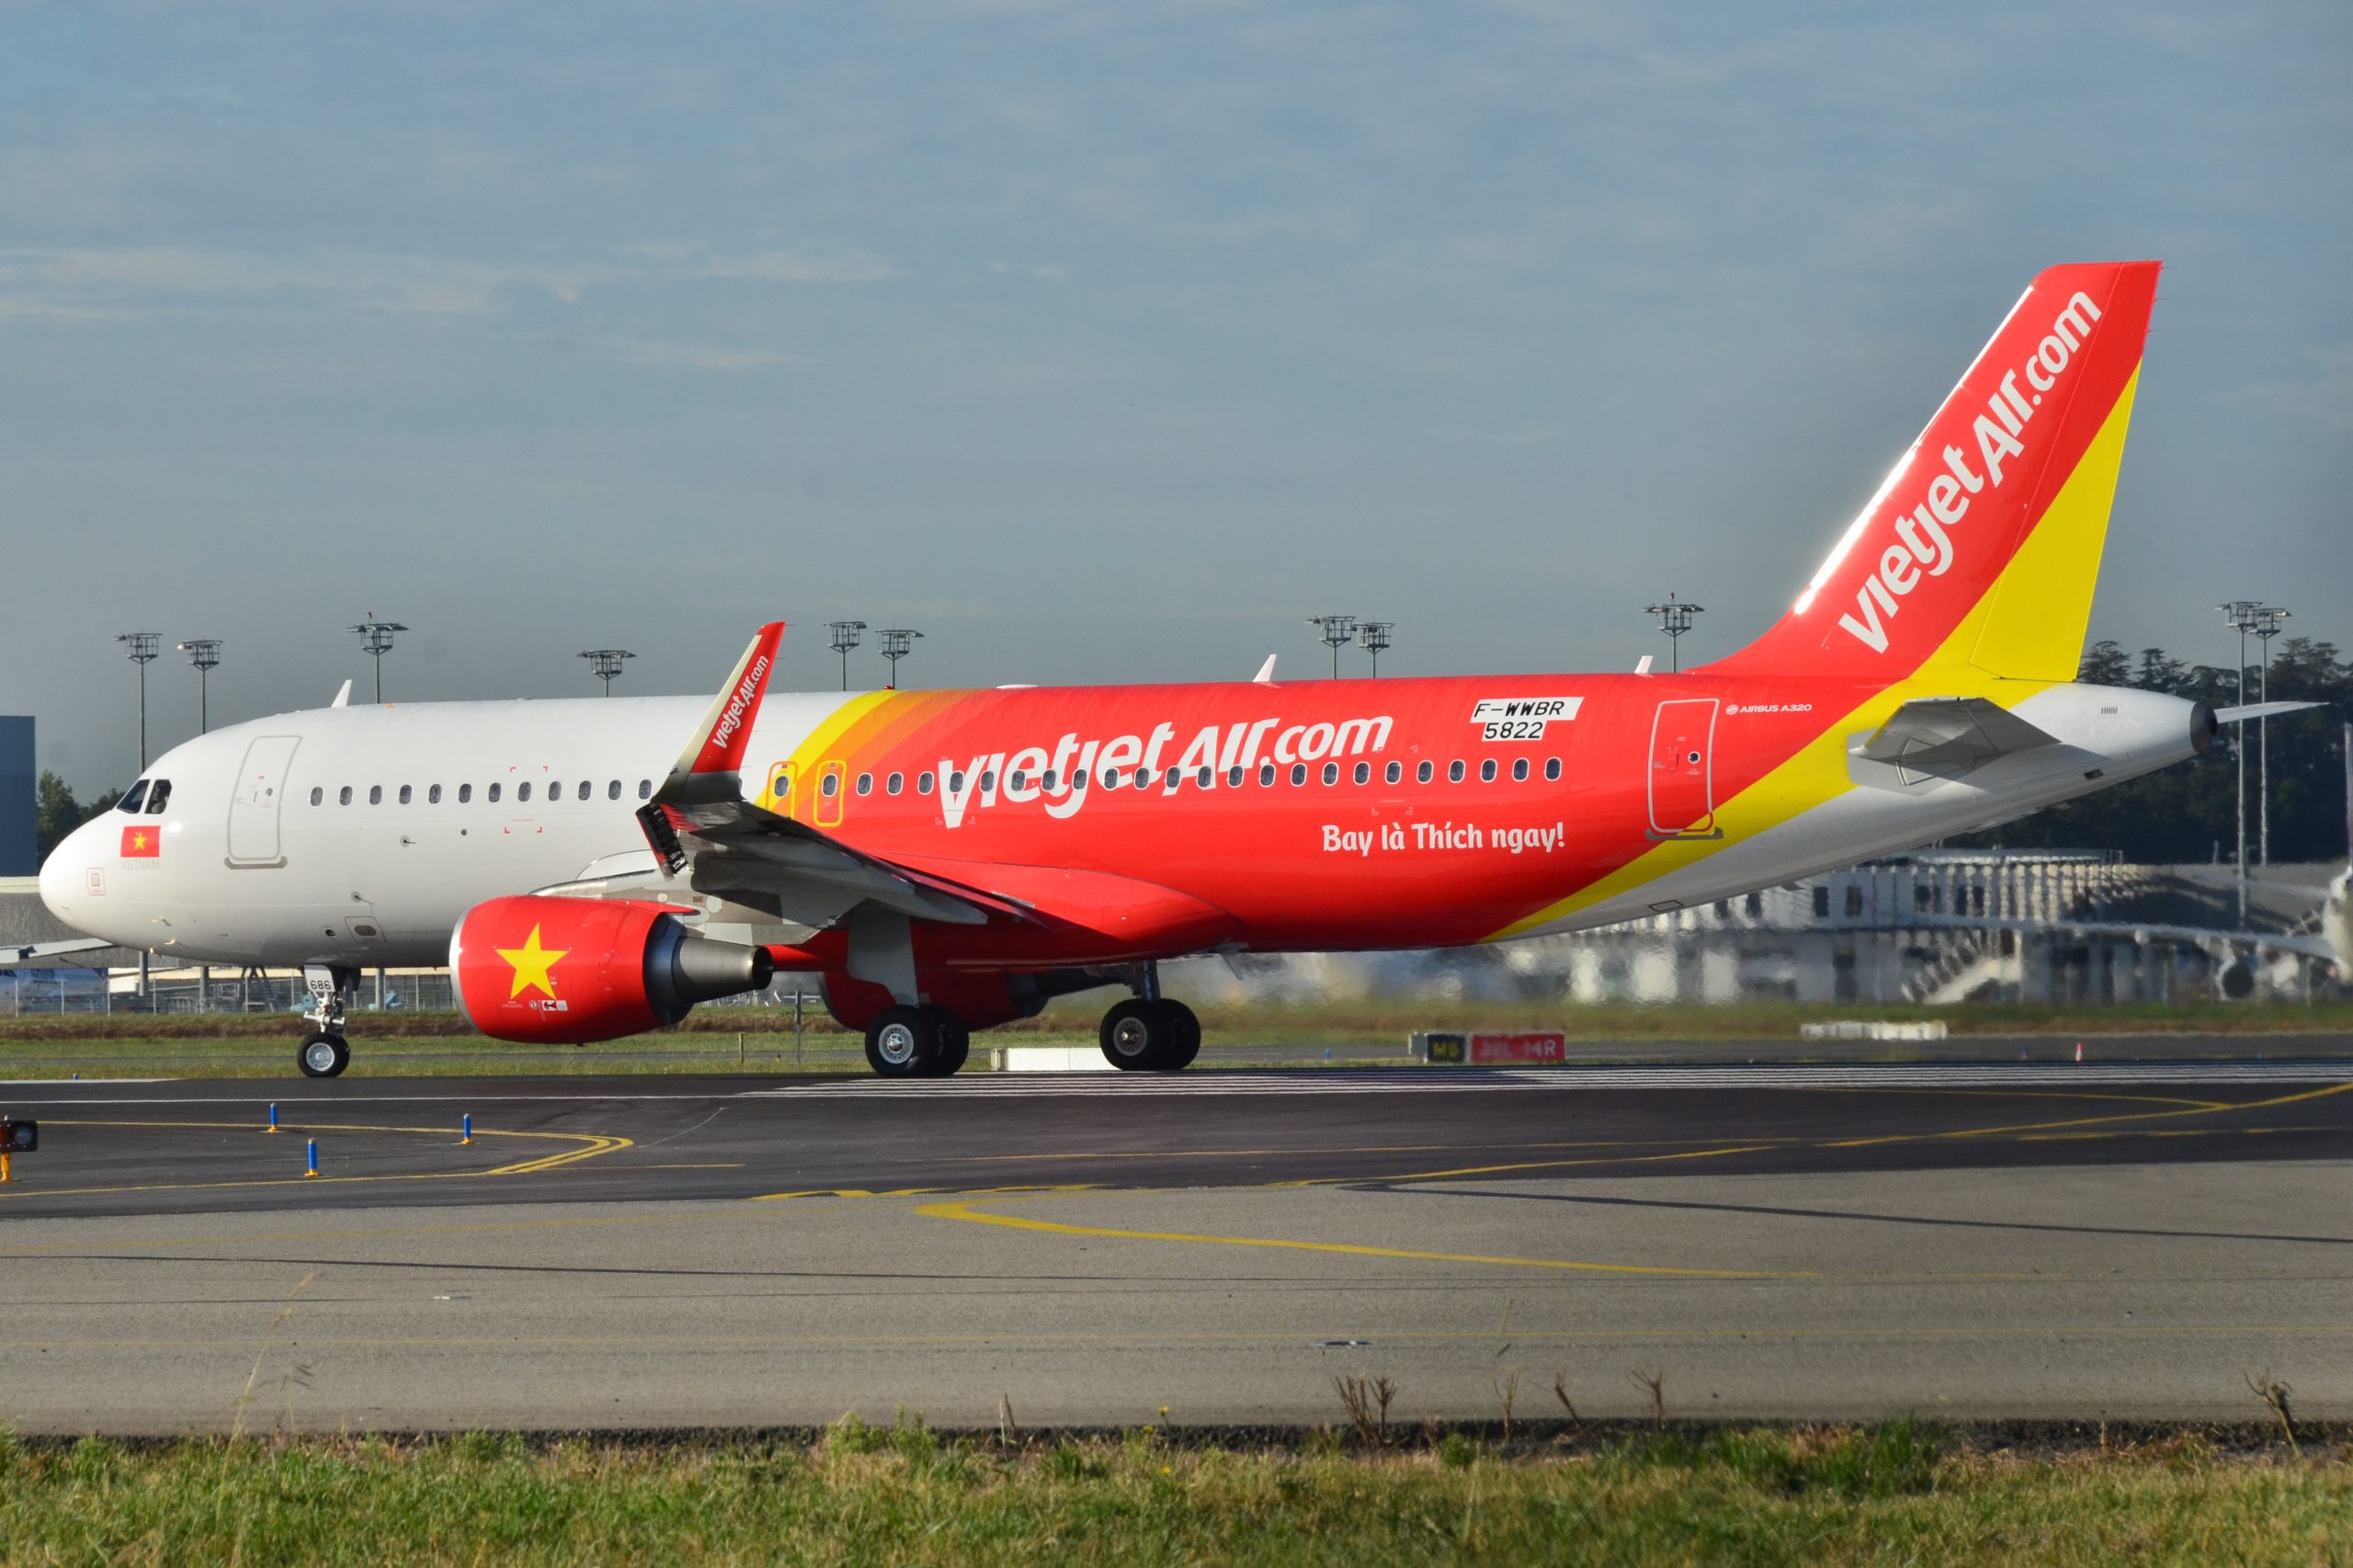 VietJet Air is the first privately owned airline in Vietnam